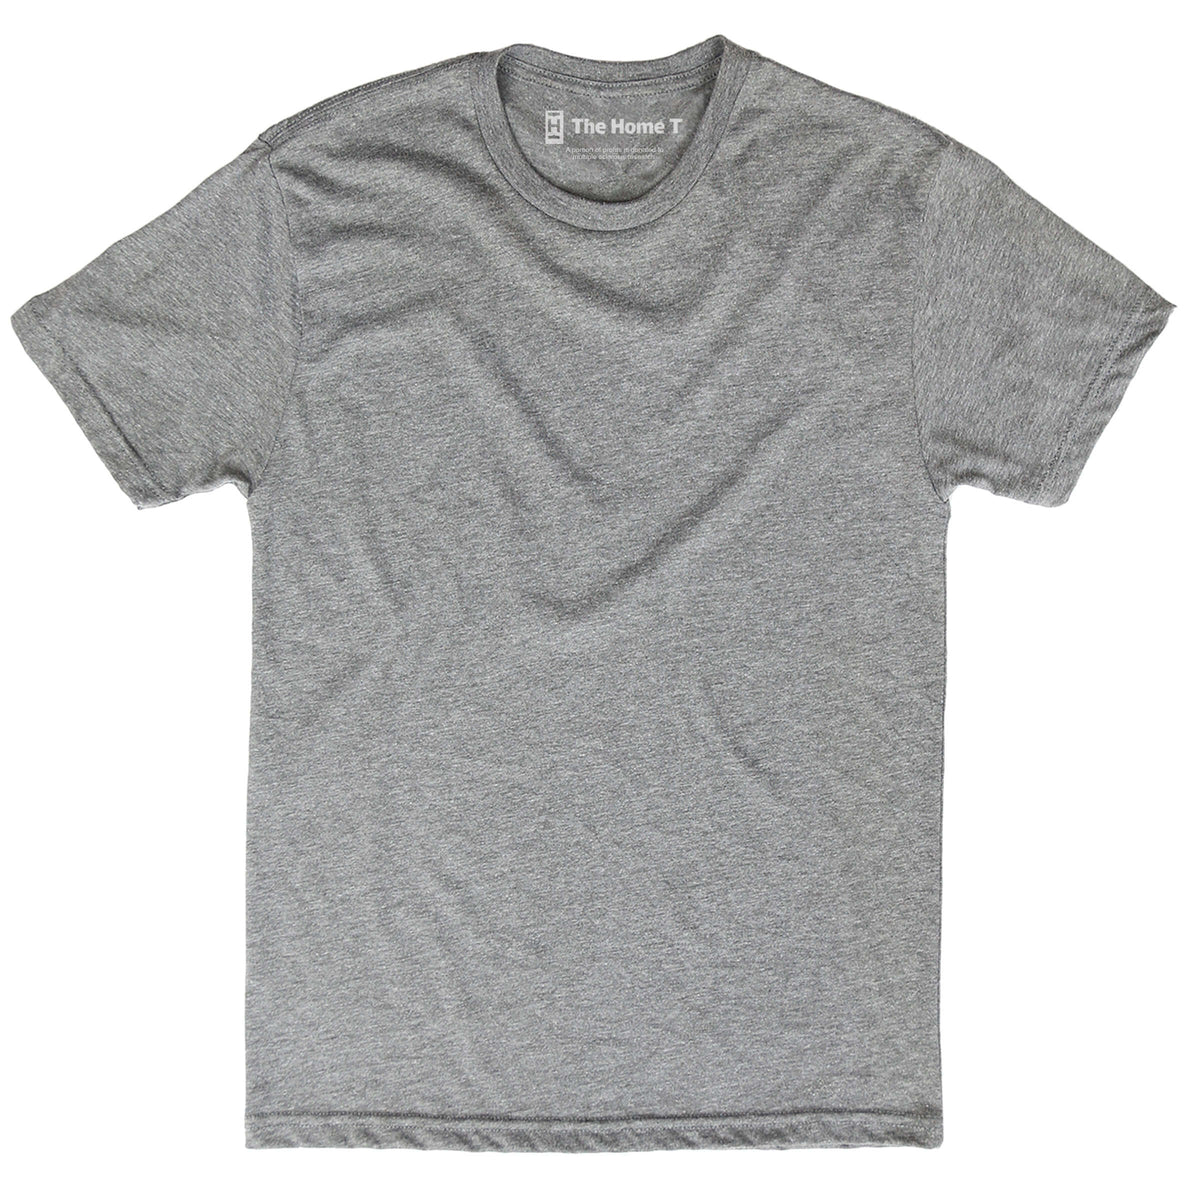 Custom T-Shirt The Home T XS Athletic Grey